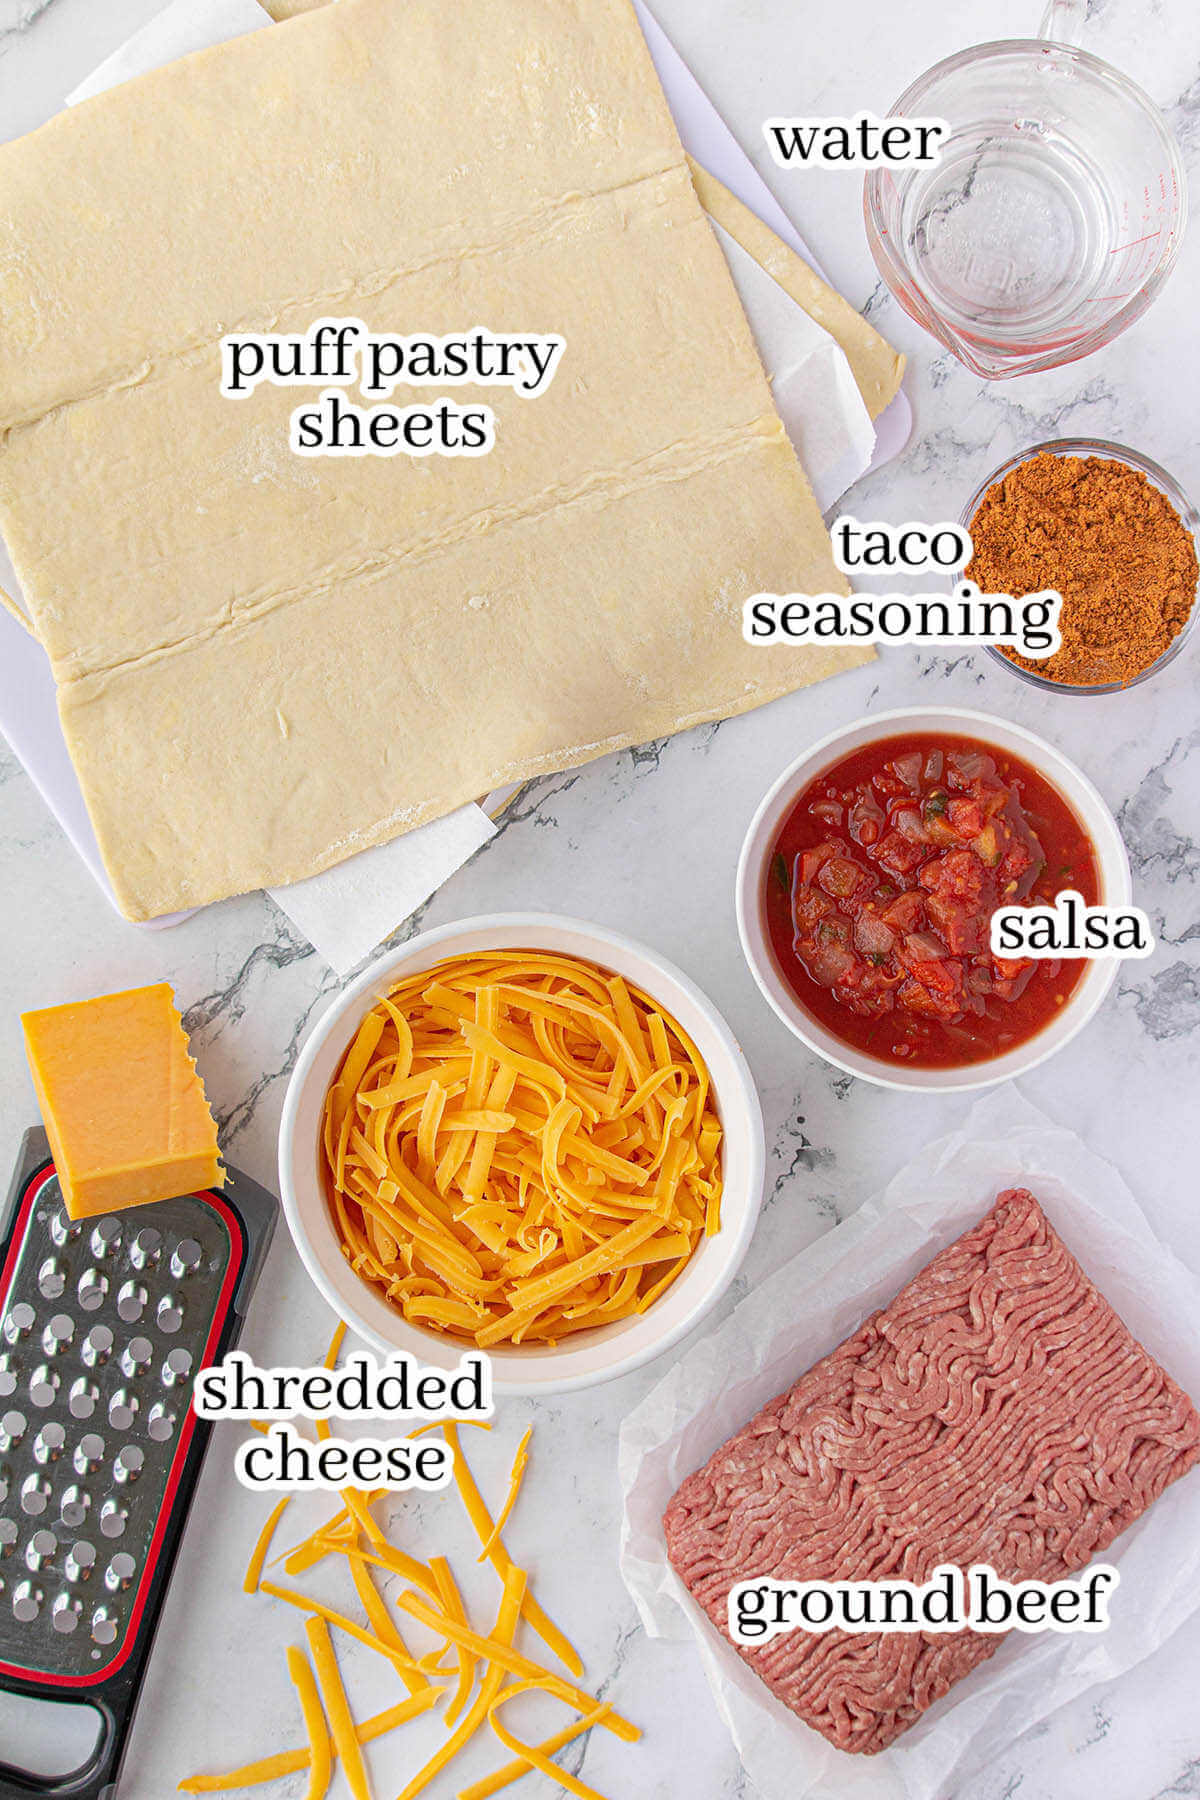 Ingredients to make puff pastry recipe, with print overlay.